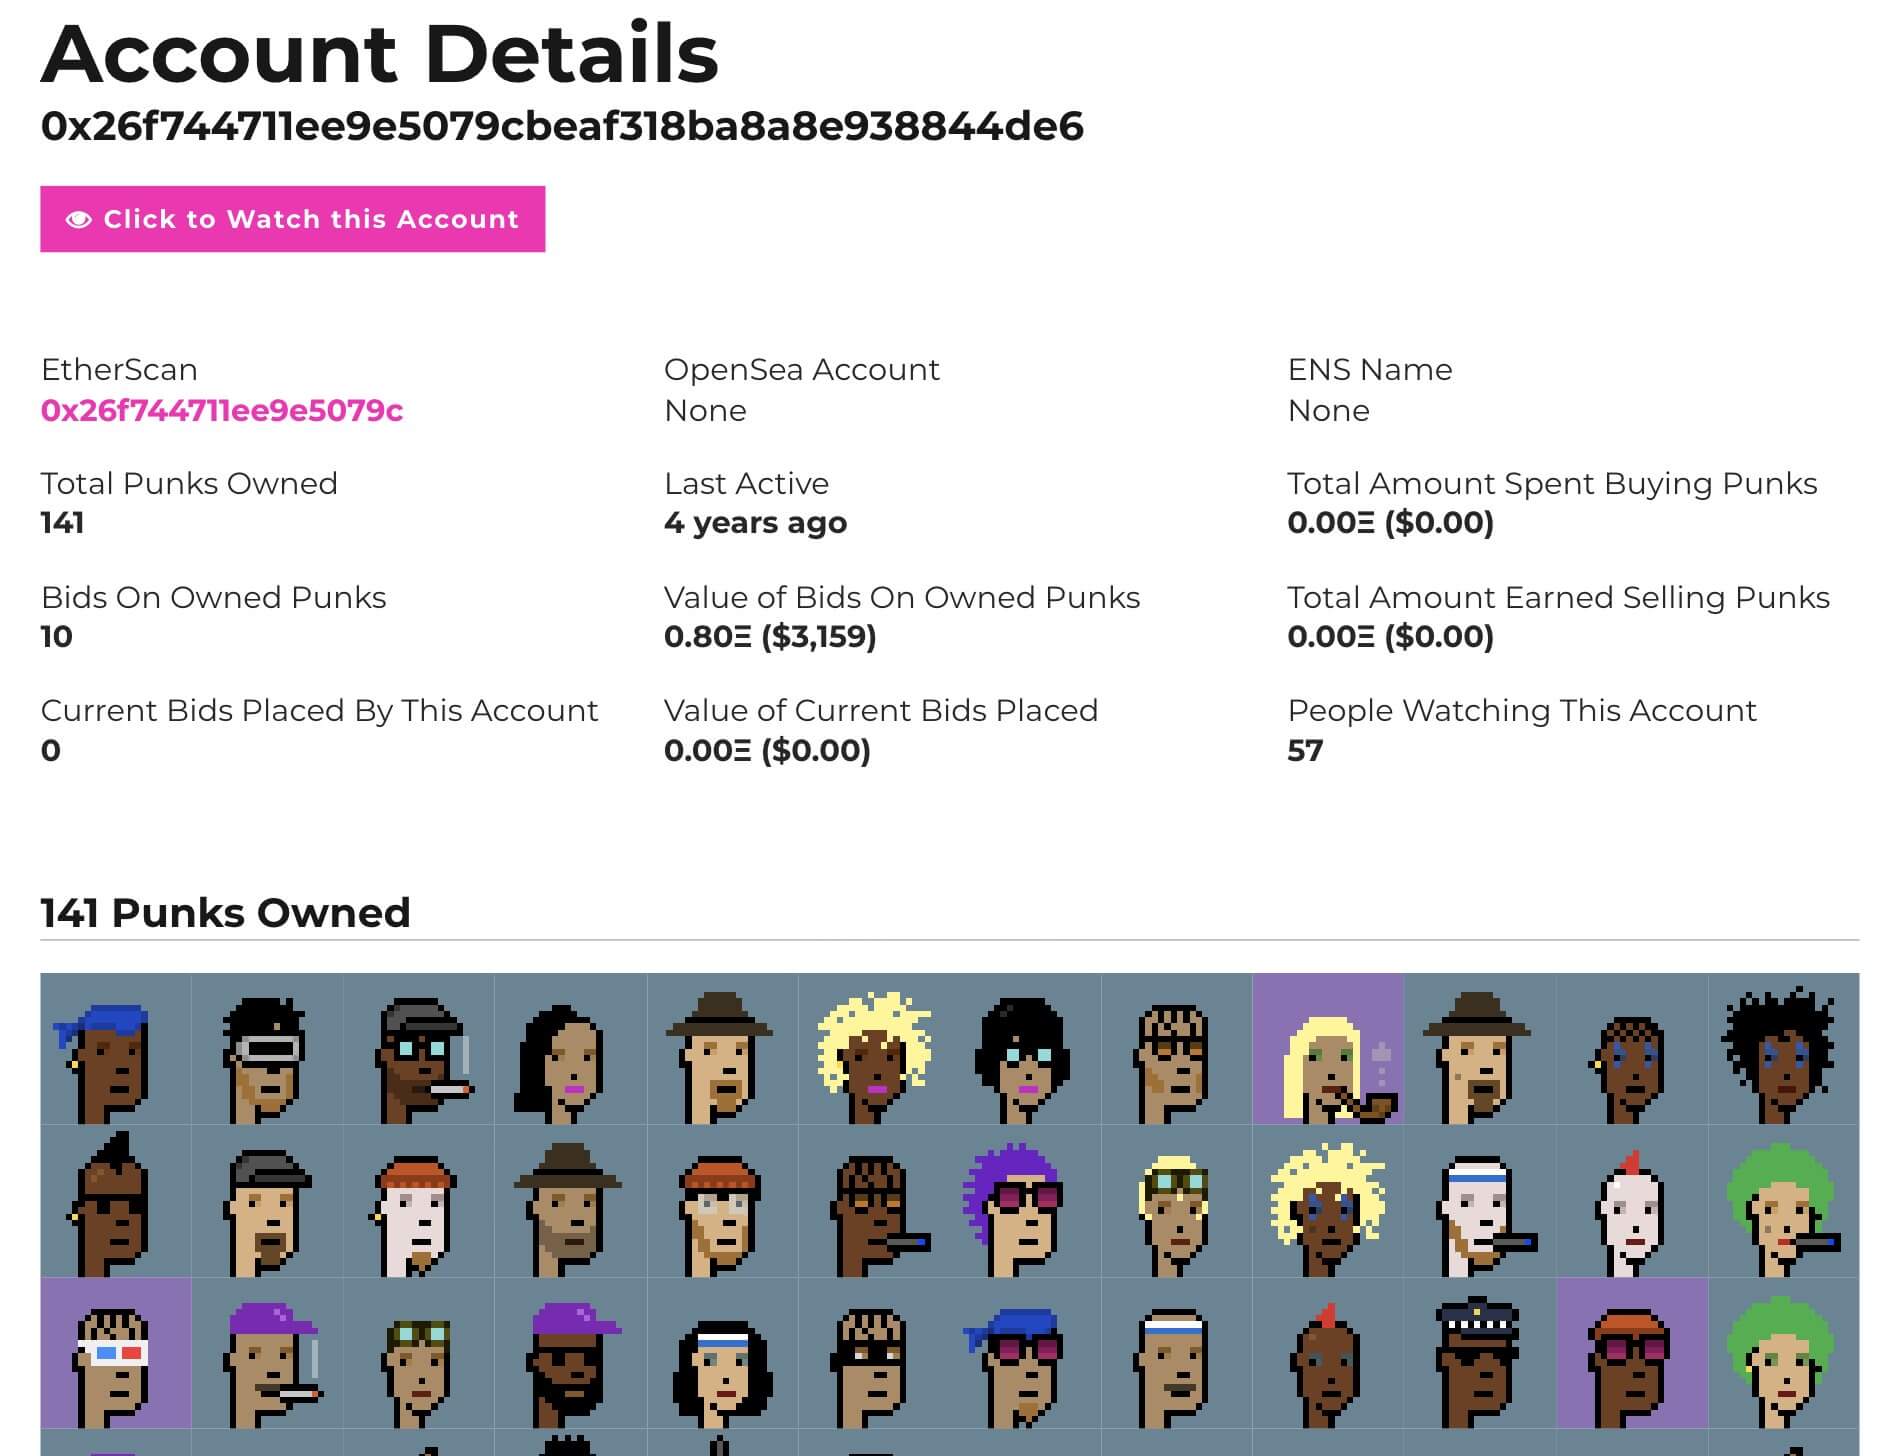 Lost(?) account holding 141 CryptoPunks